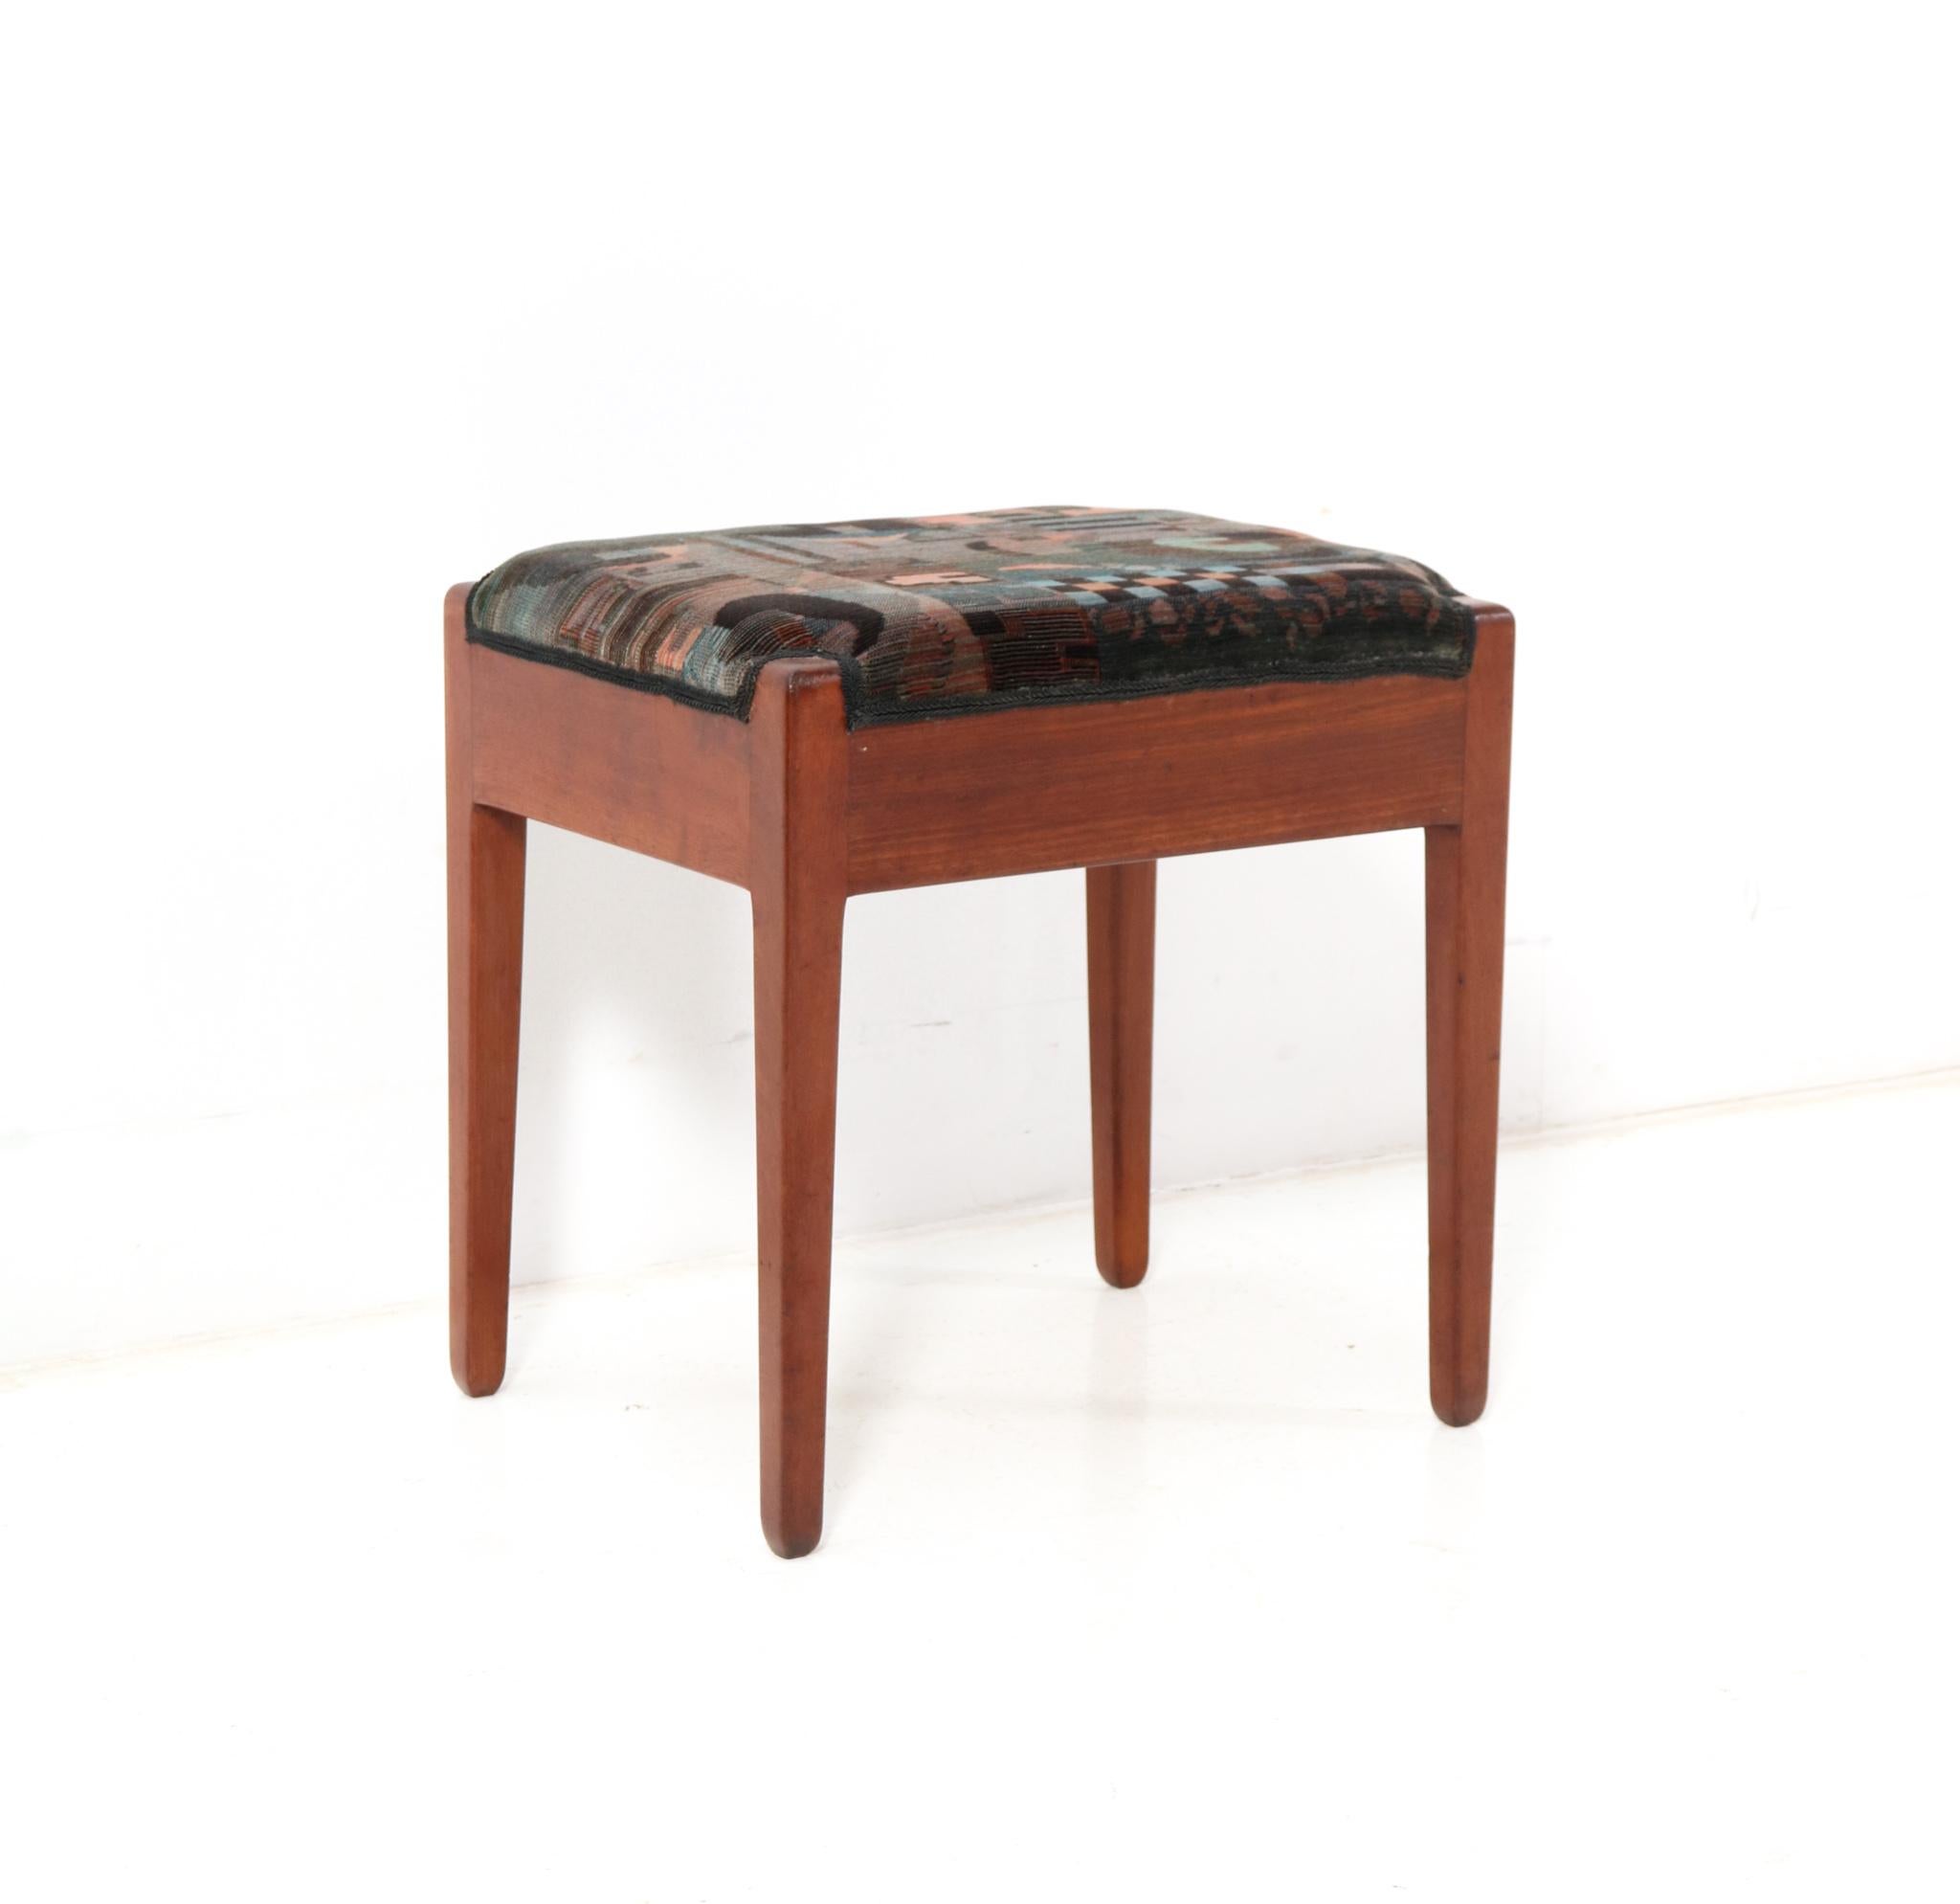 Stunning and rare Art Deco Modernist stool.
Design by L.O.V. Oosterbeek.
Striking Dutch design from the 1920s.
Solid walnut base and re-upholstered with a multicolored Art Deco fabric.
This wonderful Art Deco Modernist stool by L.O.V. Oosterbeek